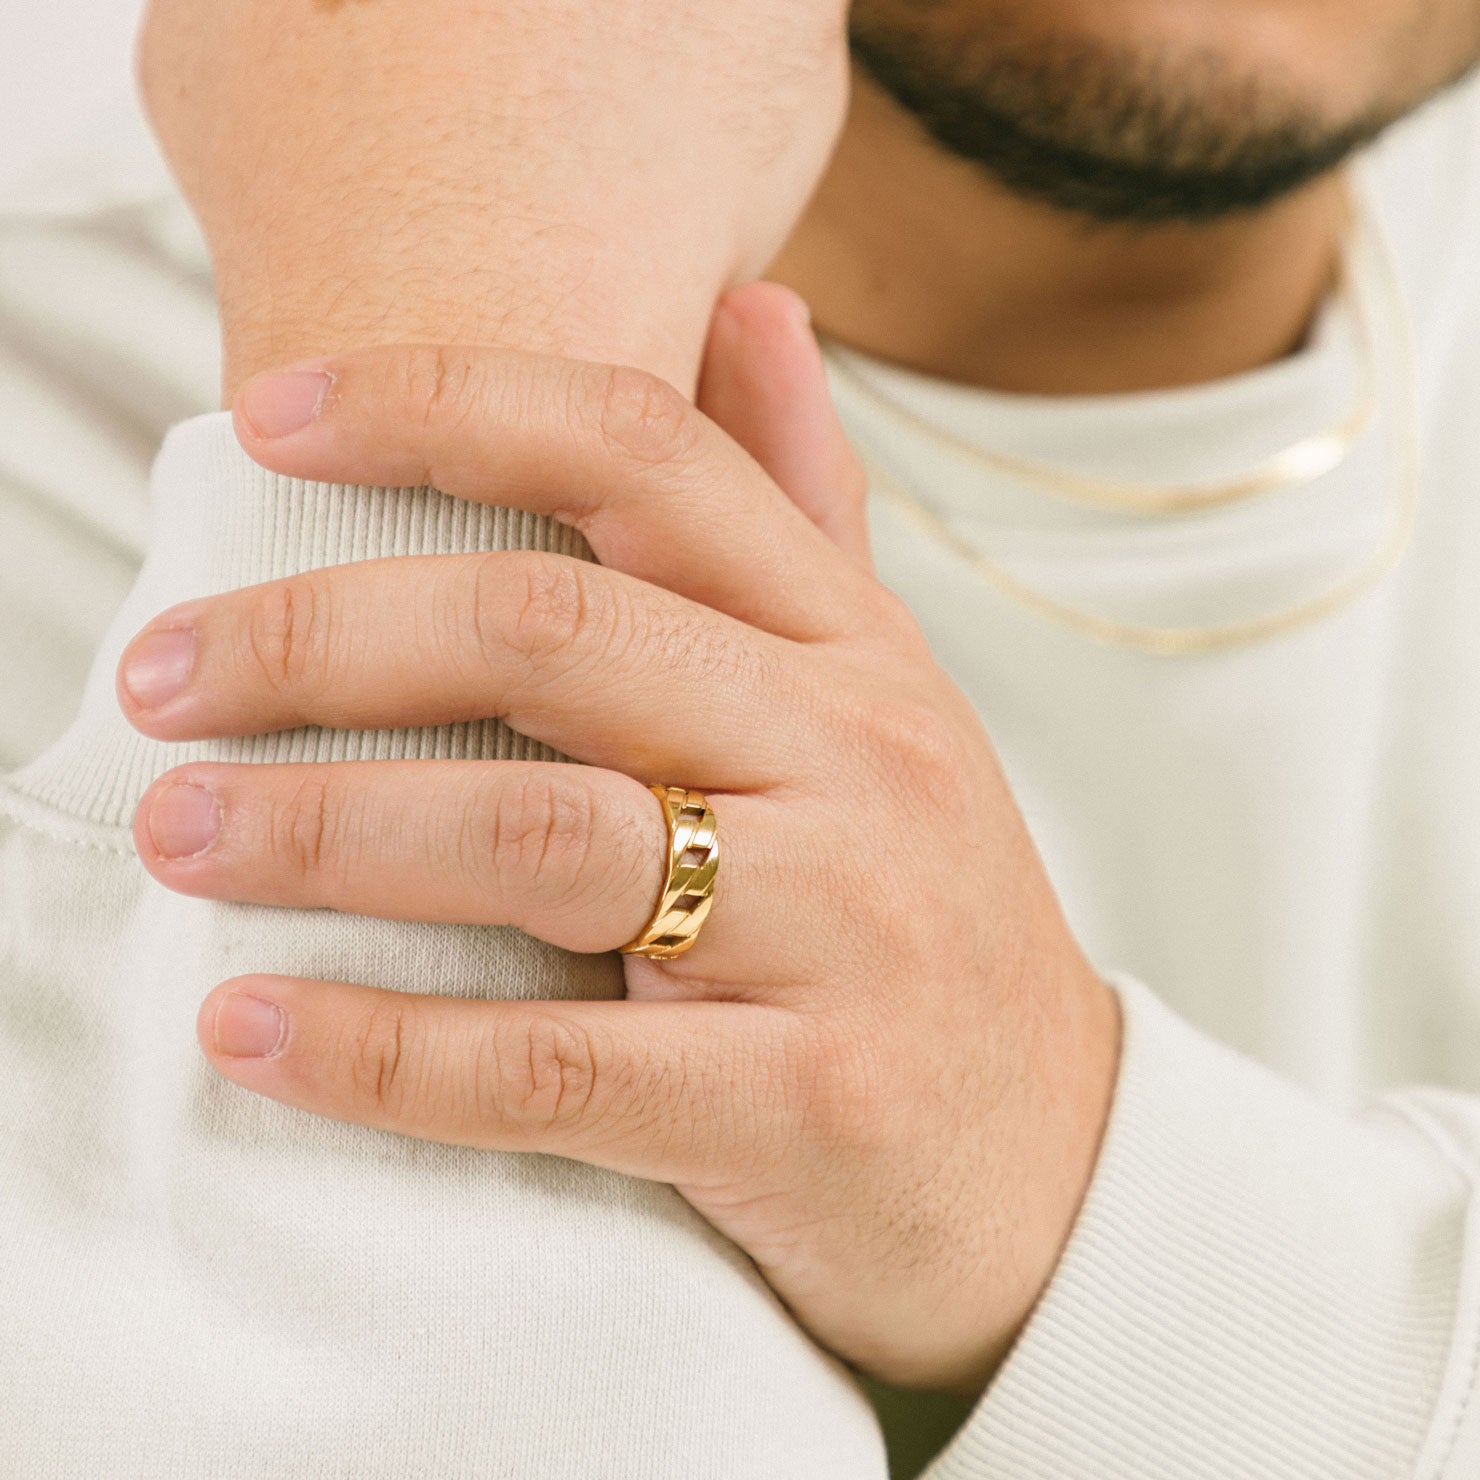 A model wearing the Cuban Link Chain Ring, crafted with 18K gold plating on stainless steel, delivering dependable protection from discoloration and water damage. Its unique design exudes a fashionable air, certain to make an impression.